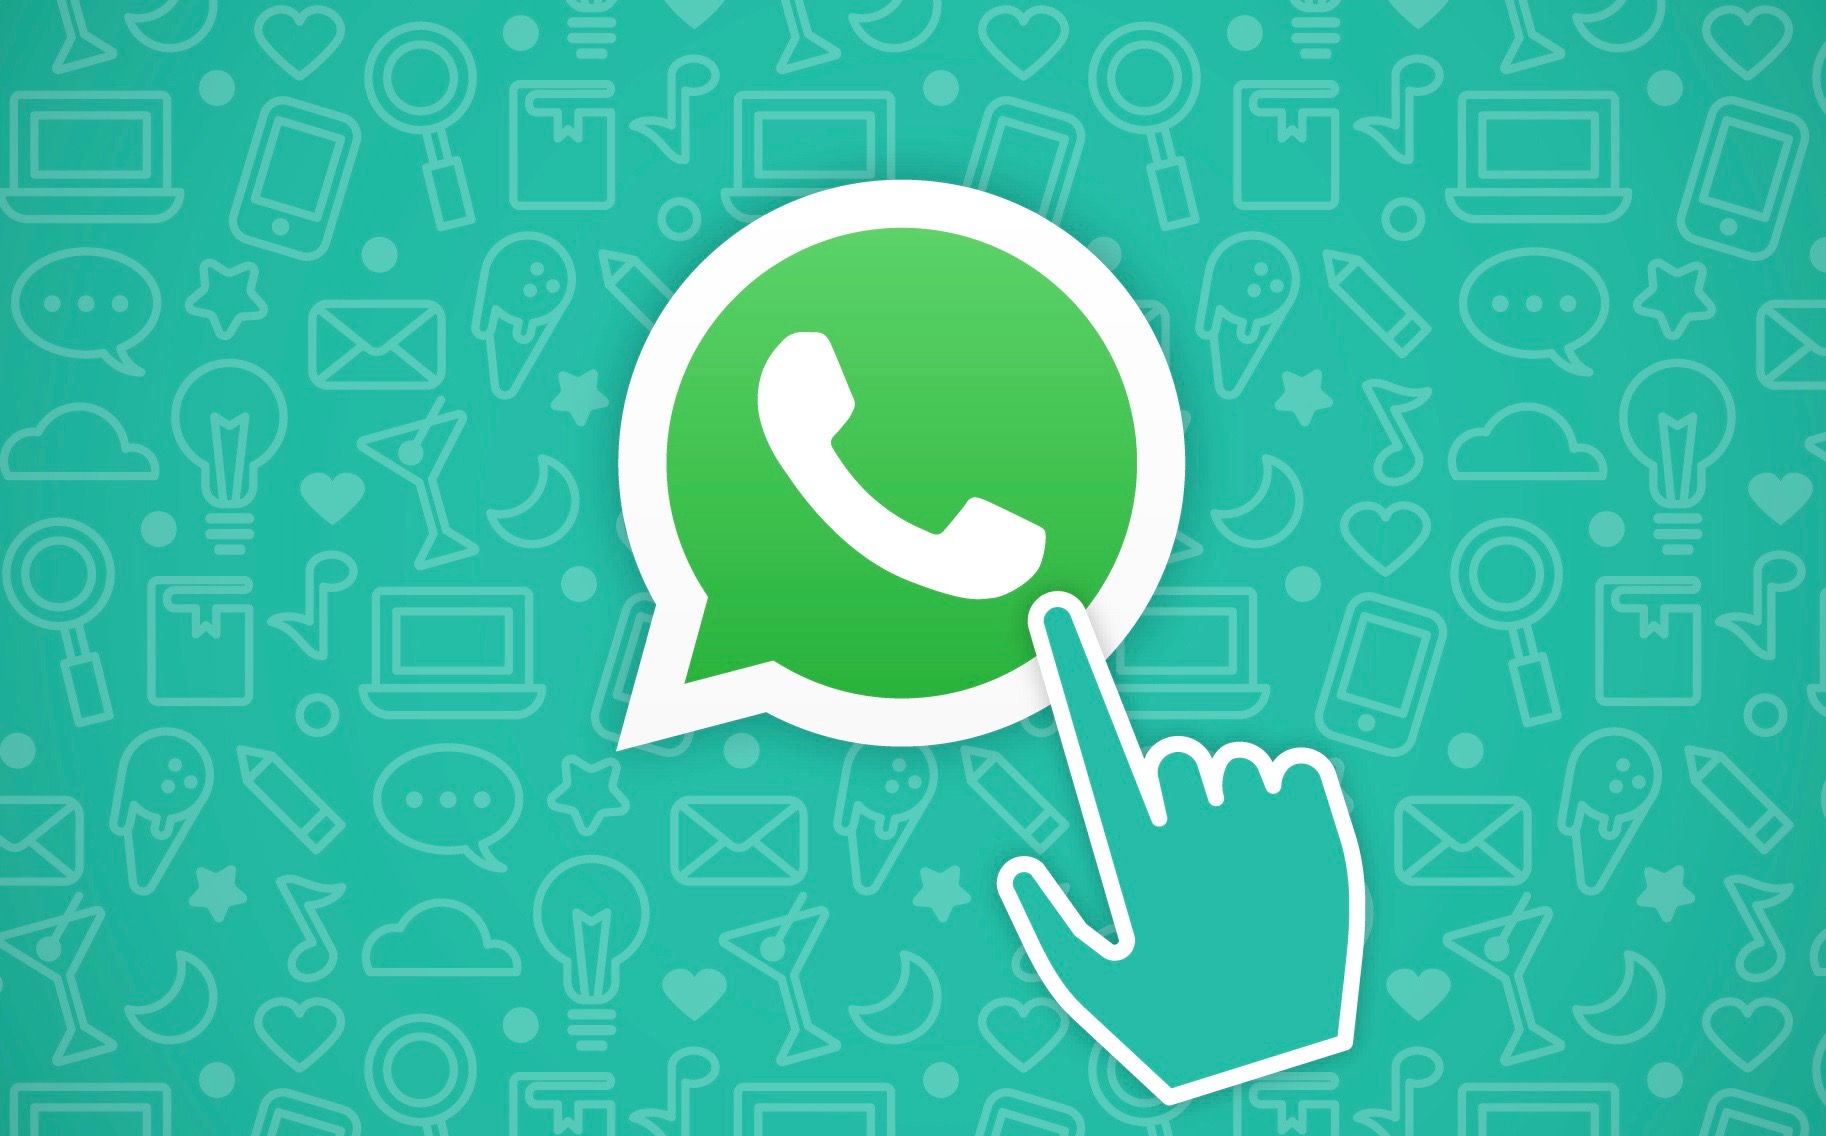 How about implementing WhatsApp registration check